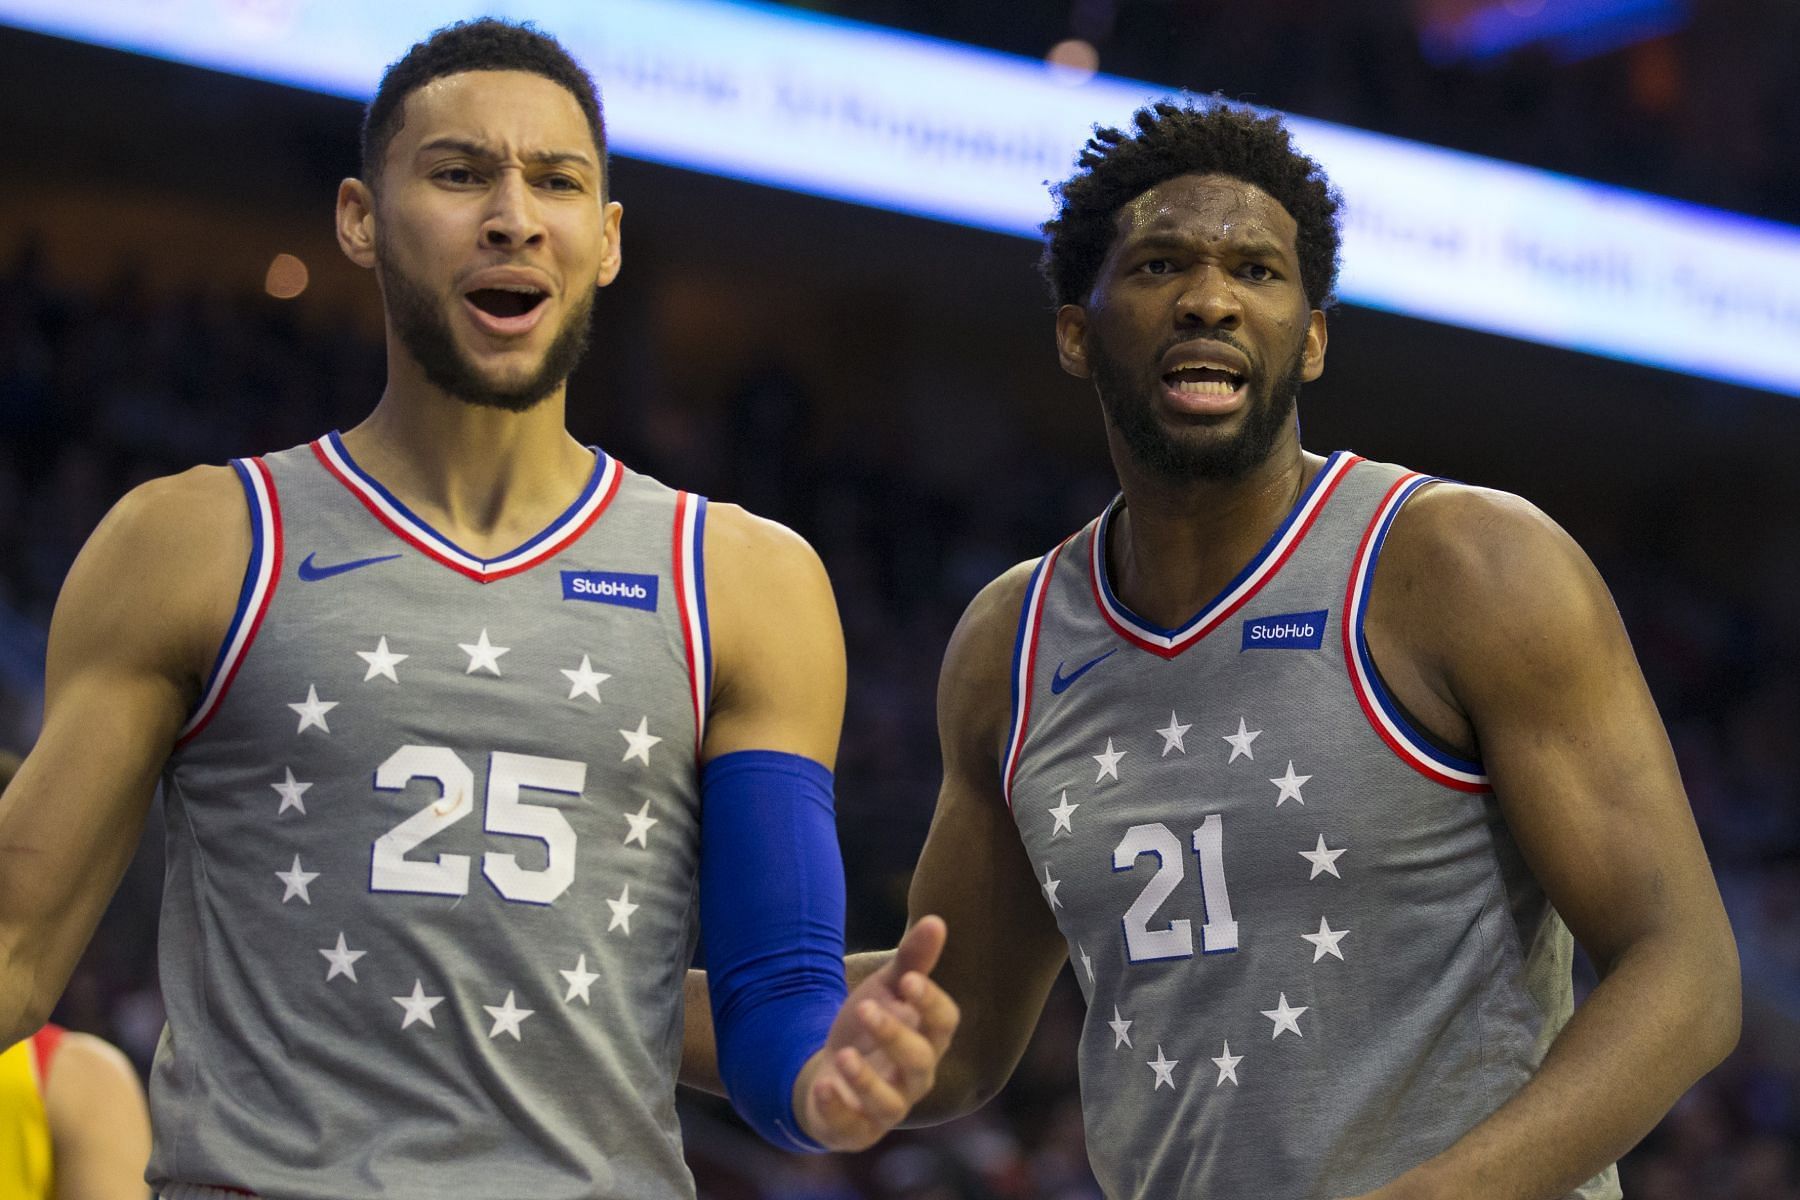 Ben Simmons and Joel Embiid during their time at the Philadelphia 76ers